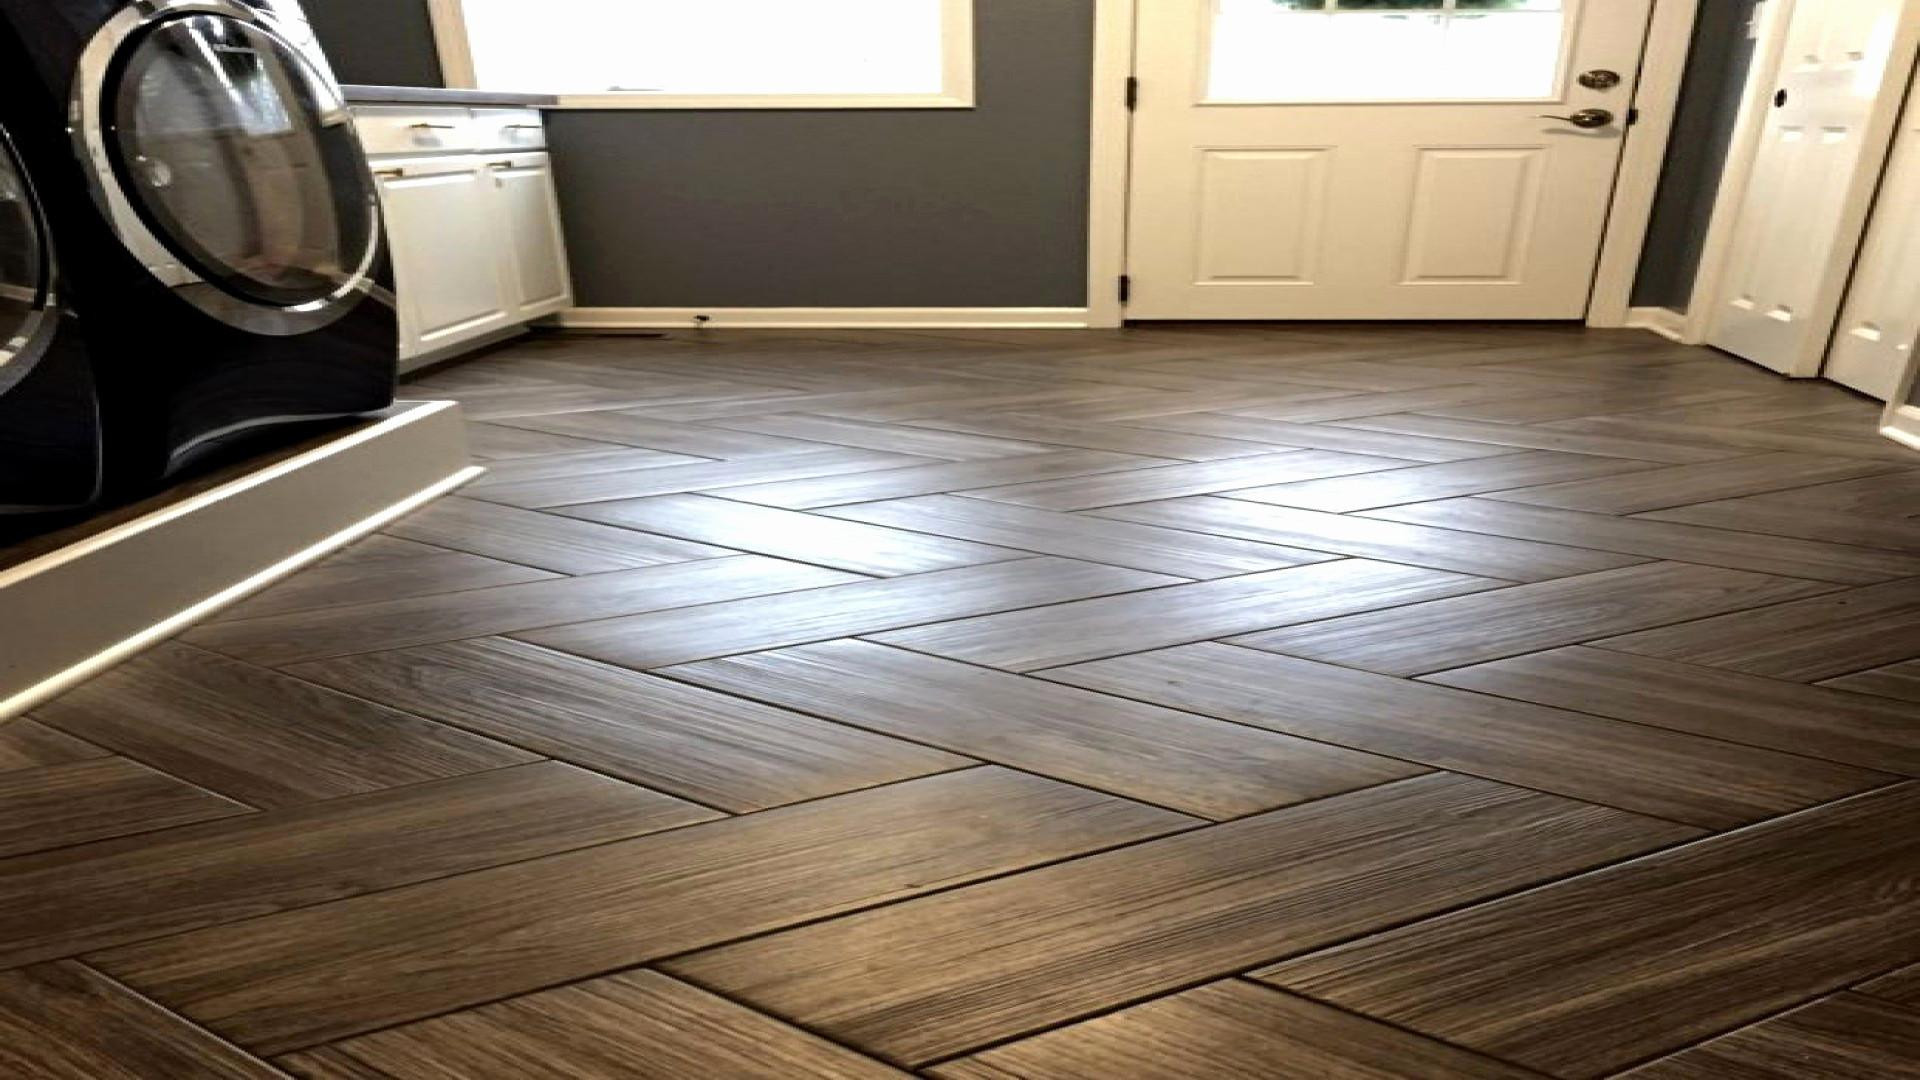 discount hardwood flooring of awesome of cheap diy flooring ideas pictures artsvisuelscaribeens com in kitchen joys kitchen joys kitchen 0d kitchens design ideas design scheme diy kitchen decor